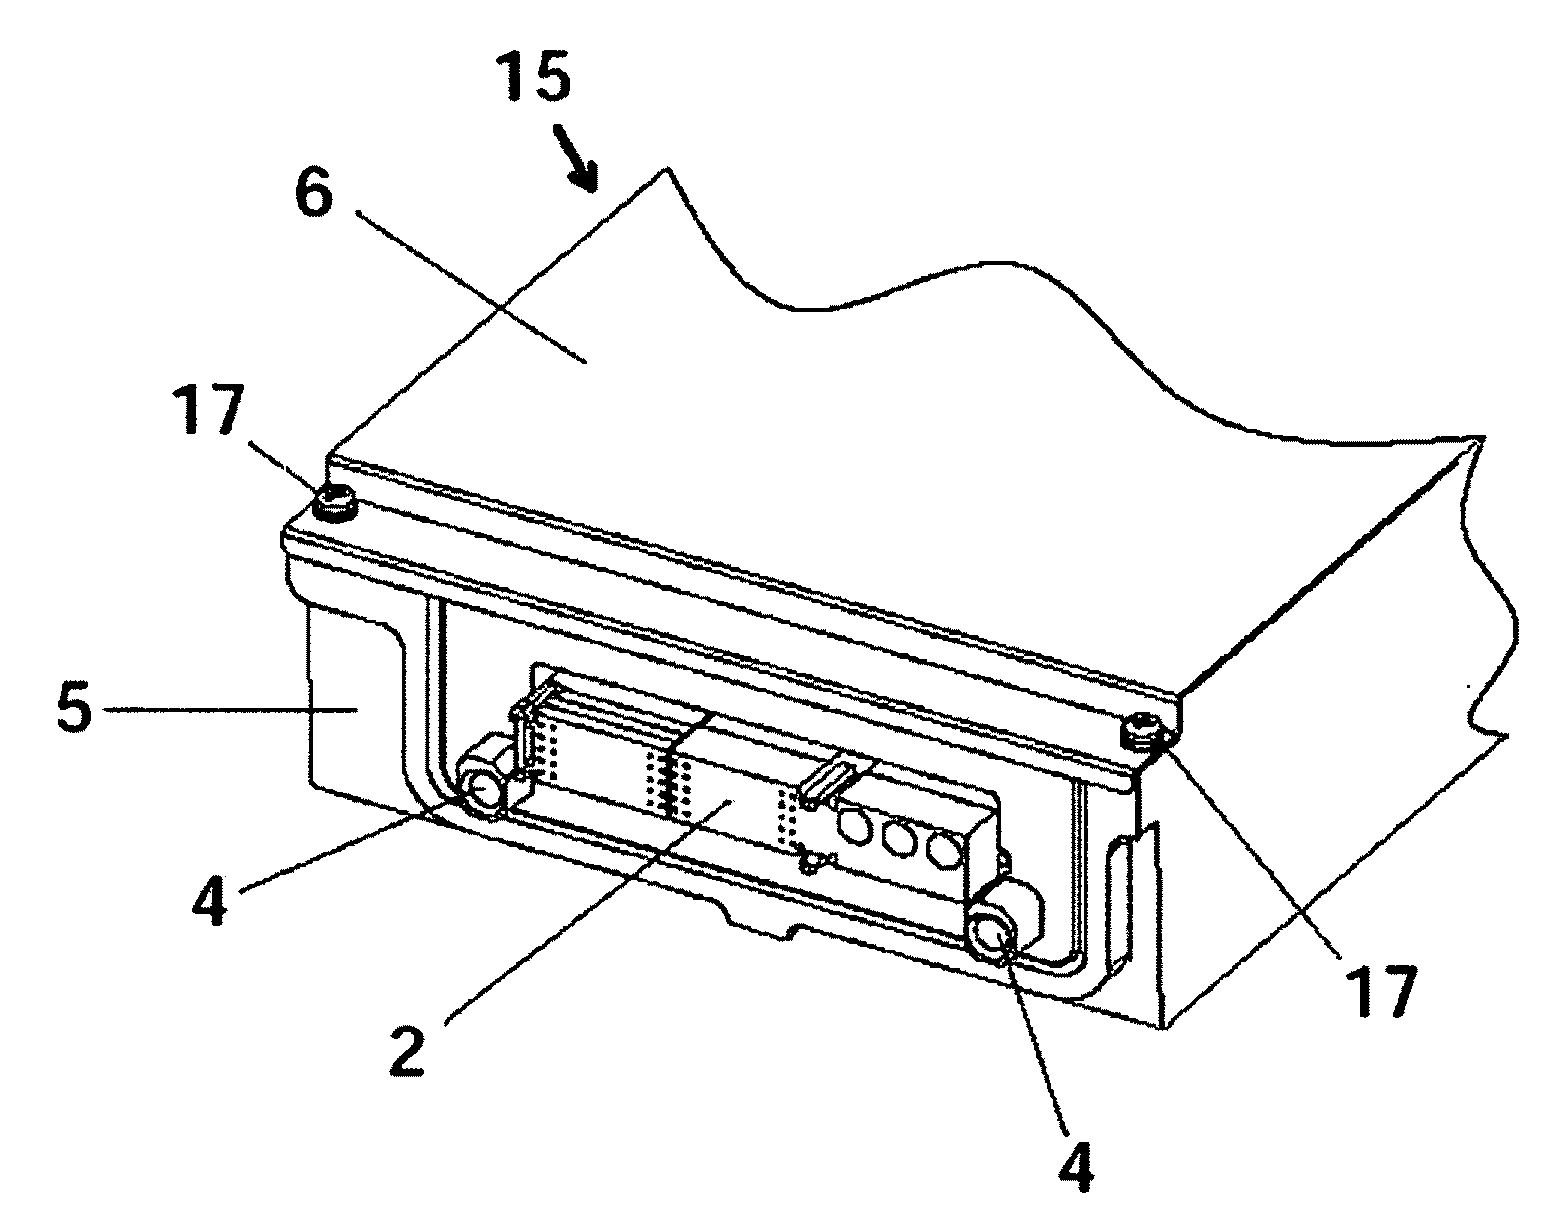 Back plug-in connector device